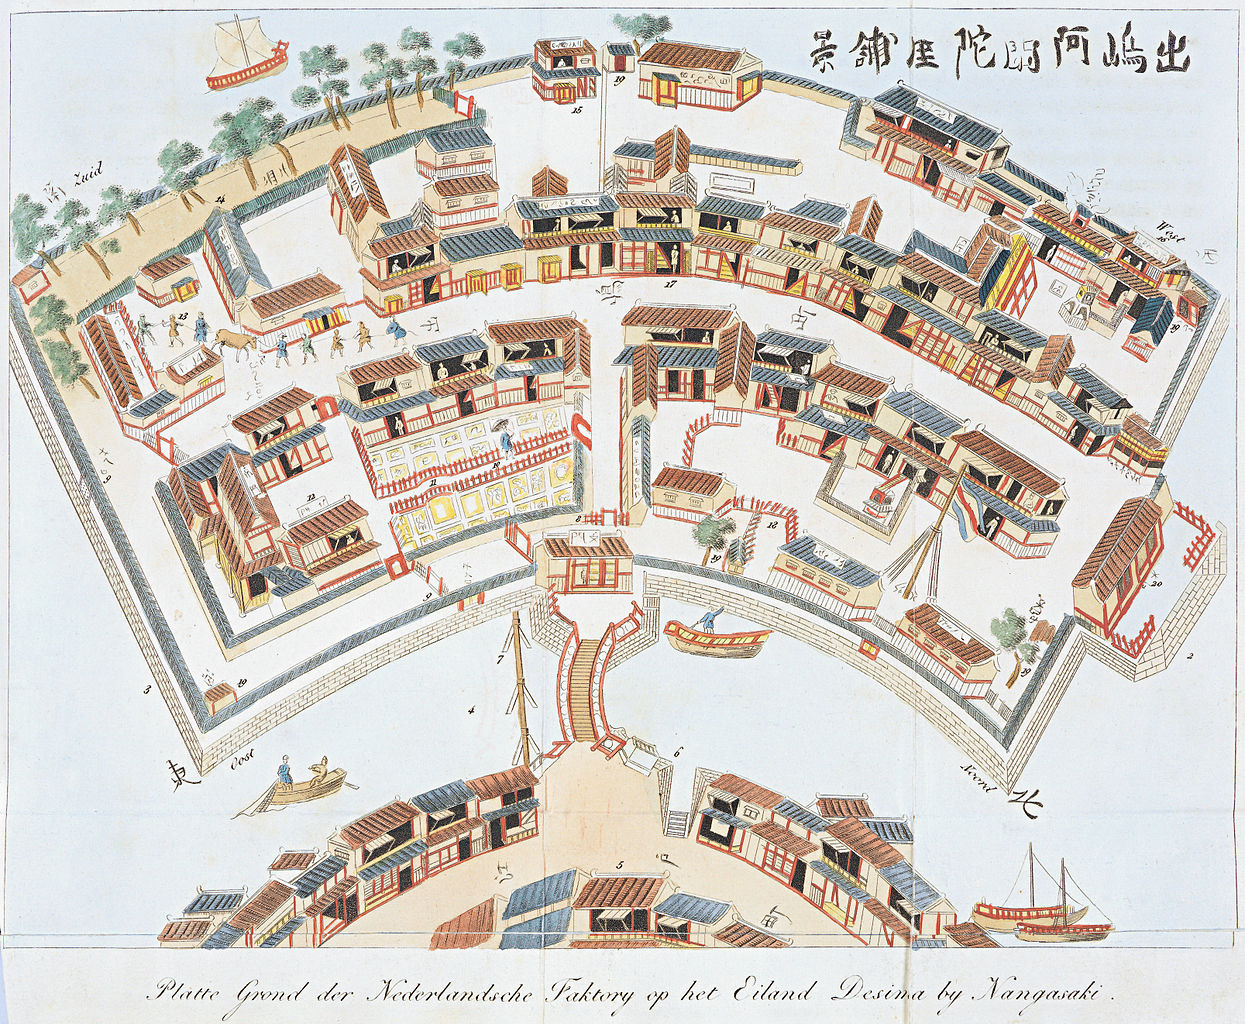 An imagined bird's-eye view of Dejima's layout and structures (copied from a woodblock print by Toshimaya Bunjiemon of 1780